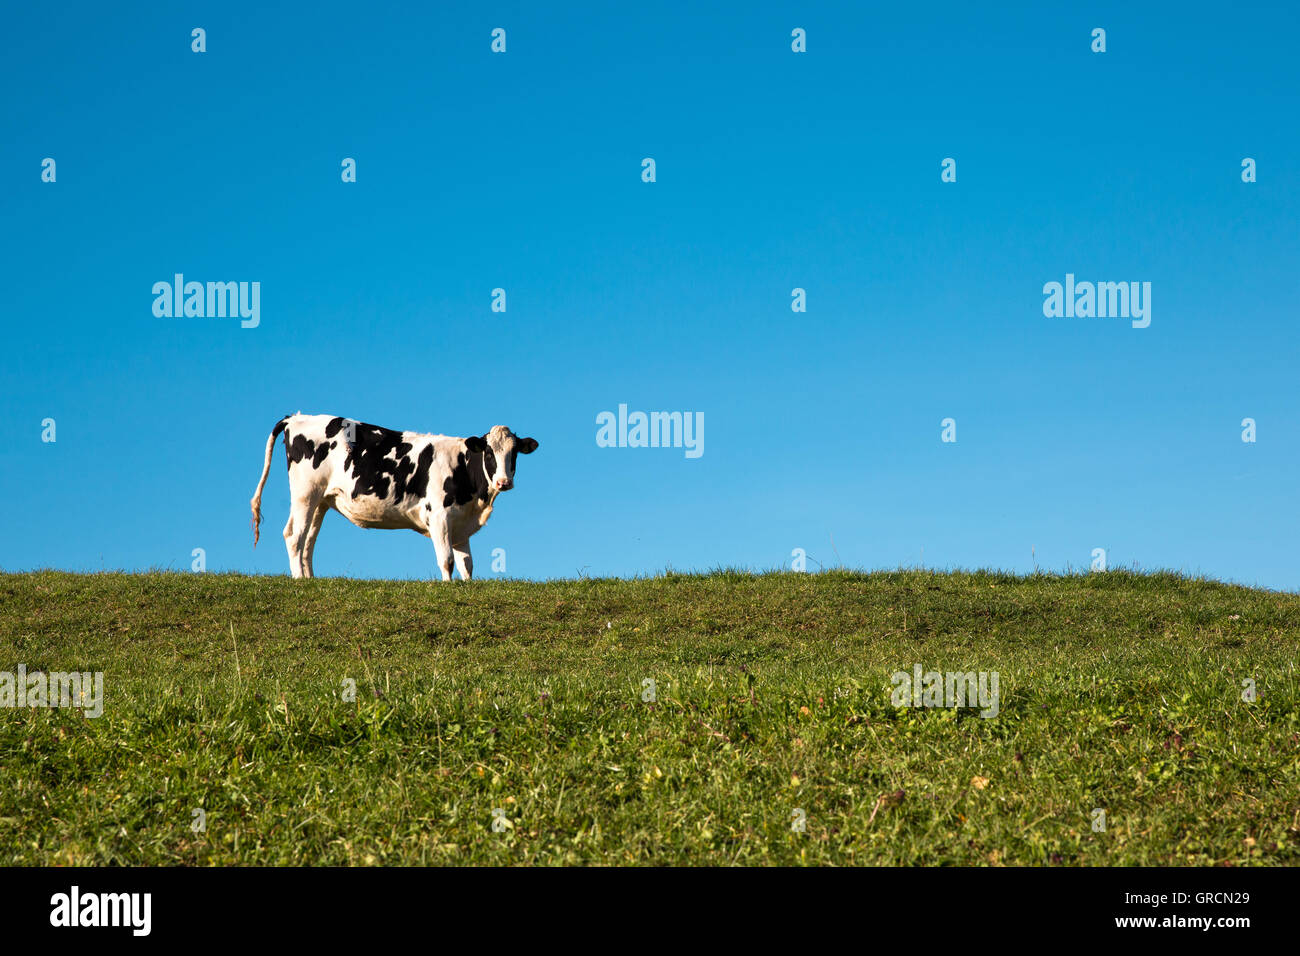 A Cow Against A Blue Sky On Green Meadow Stock Photo